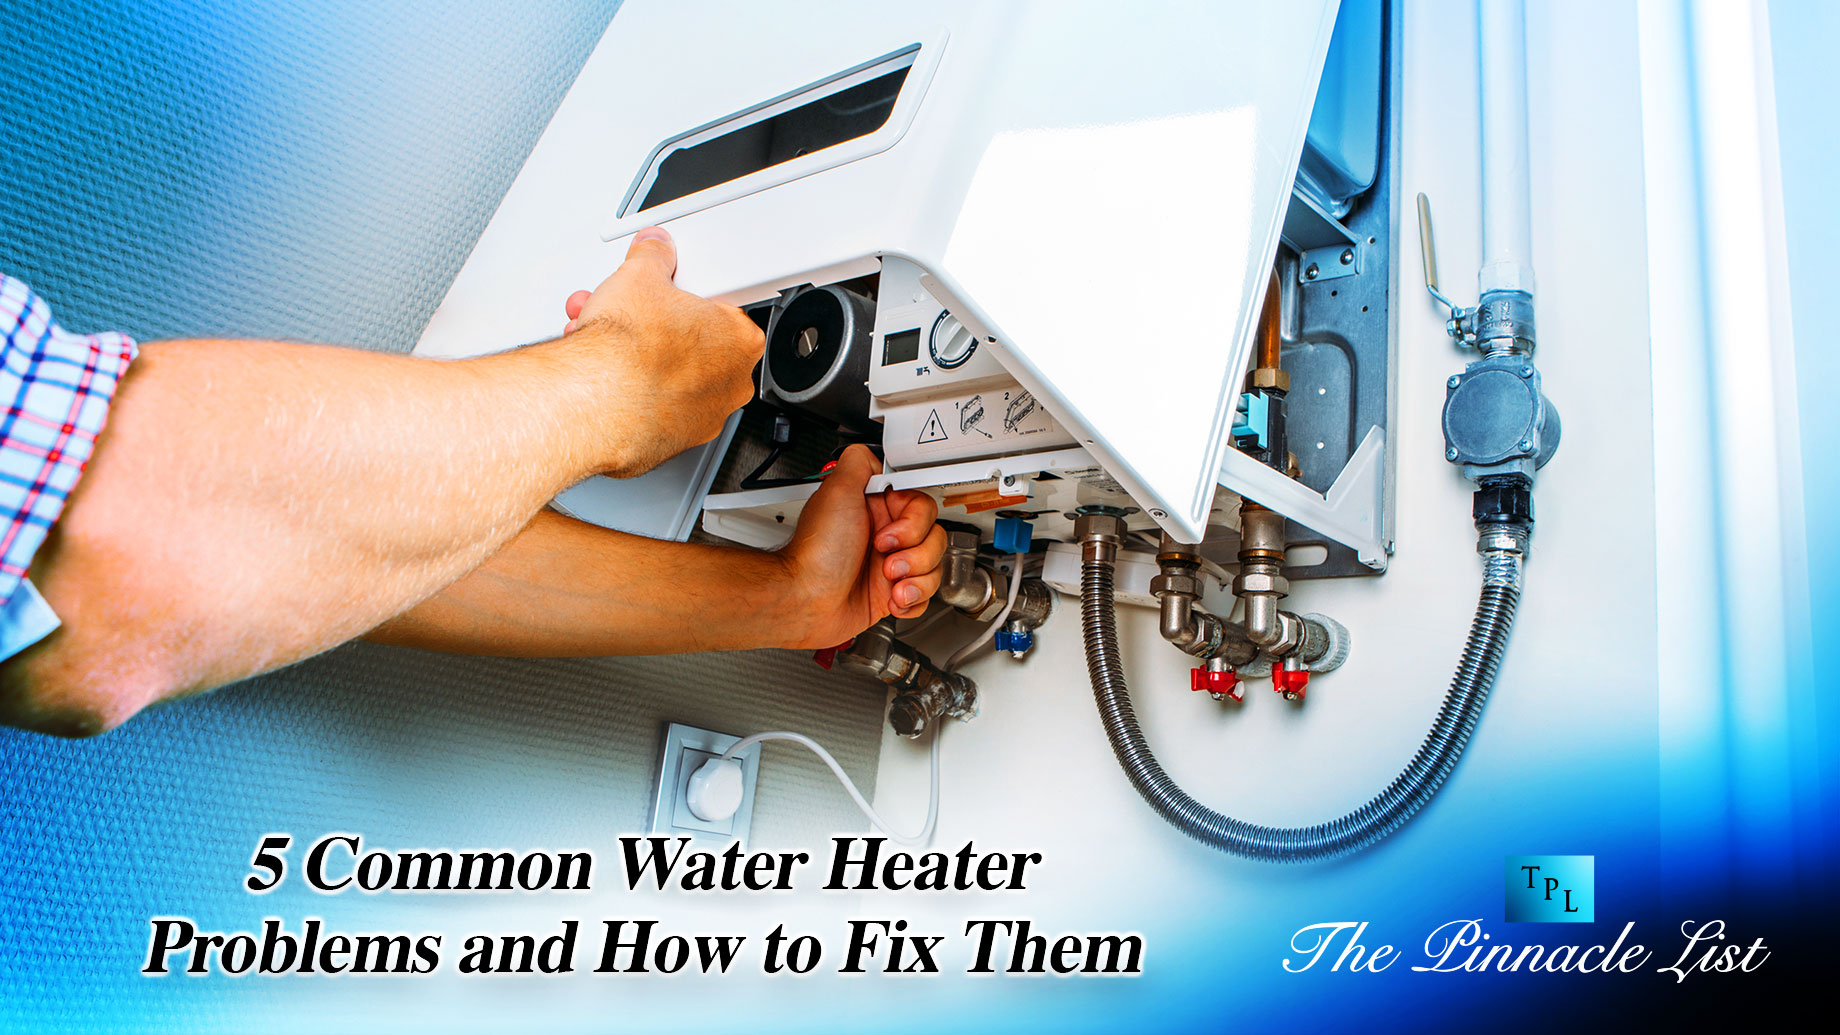 5 Common Water Heater Problems and How to Fix Them